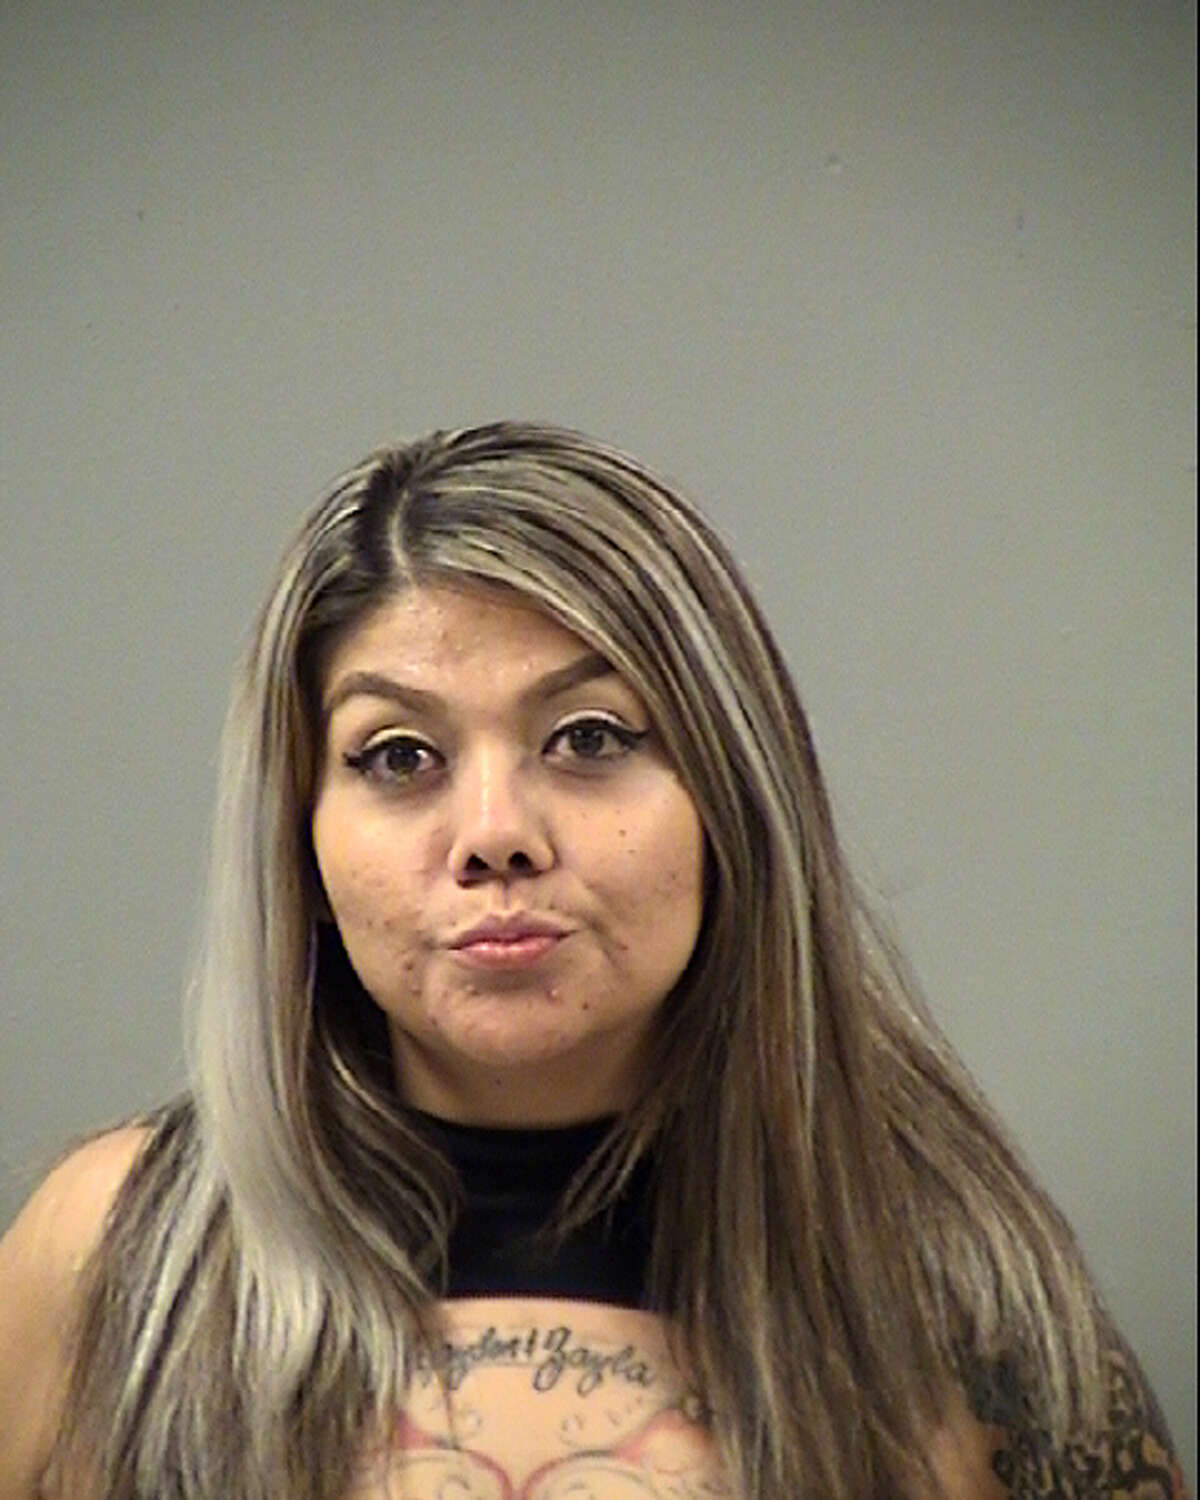 Jezebel Eve Vasquez Charge(s): Driving while intoxicated — with child passenger under 15 years old Charge date: Sept. 23, 2017